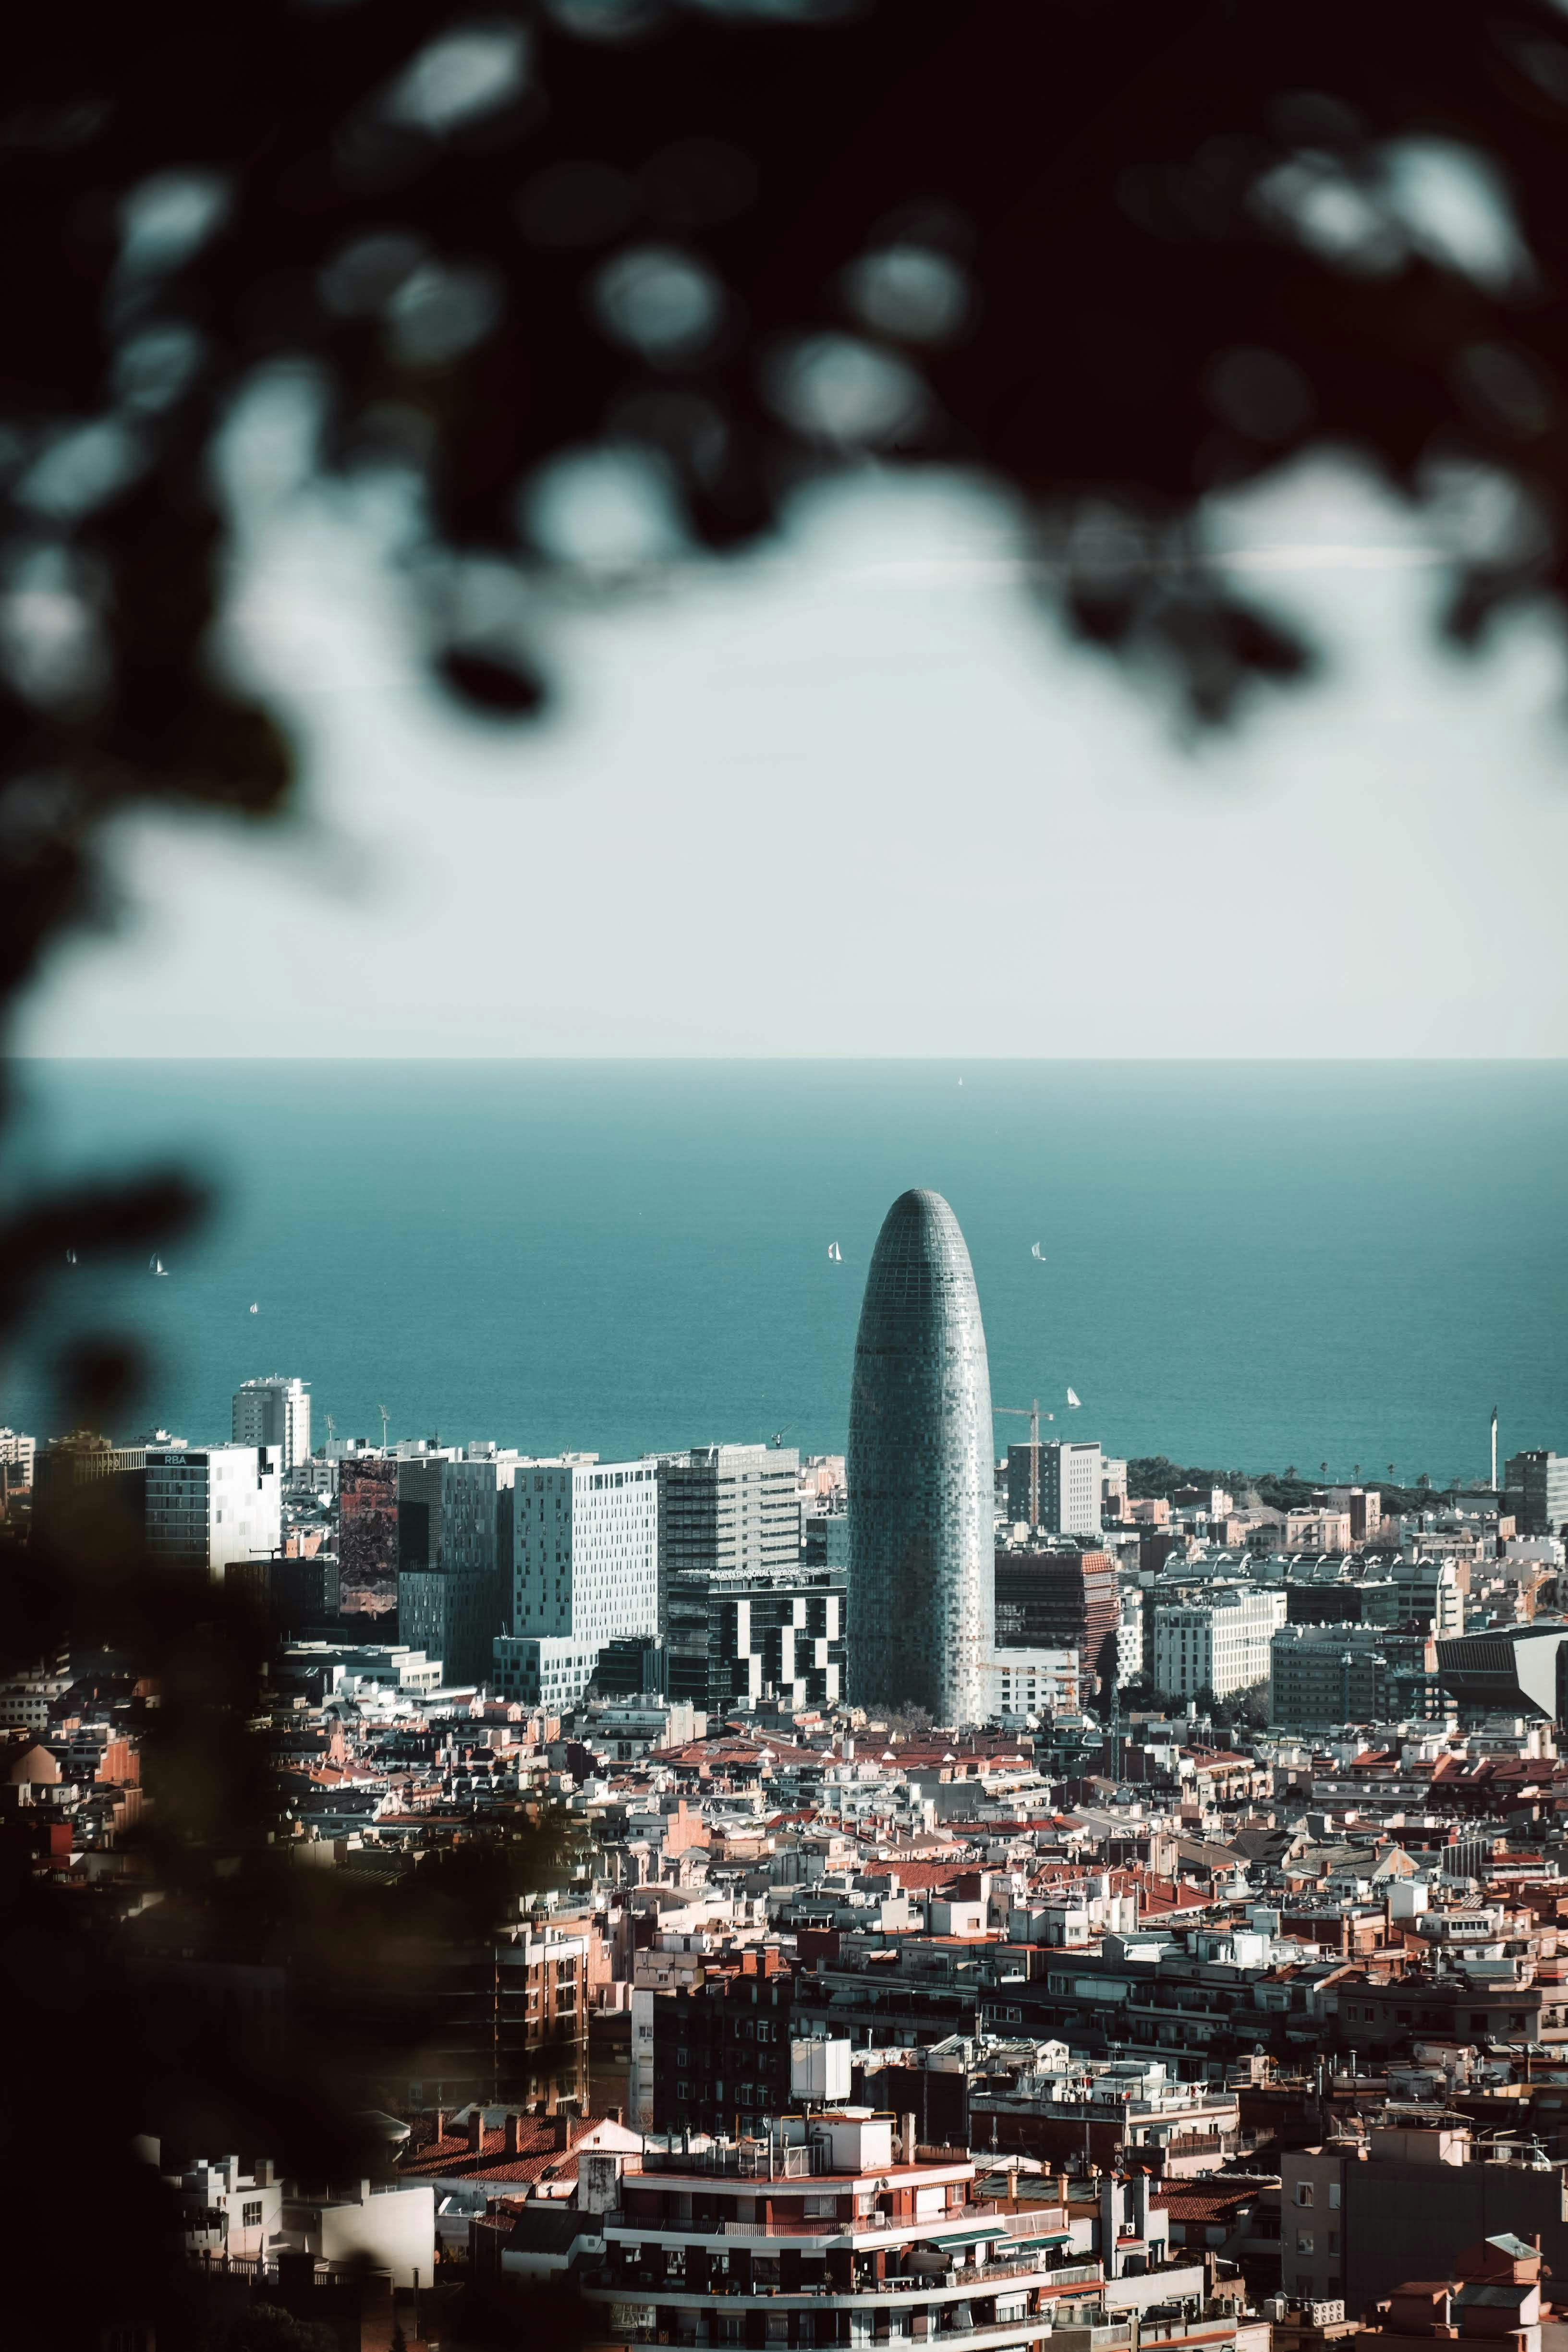 Barcelona as ancient as it is modern